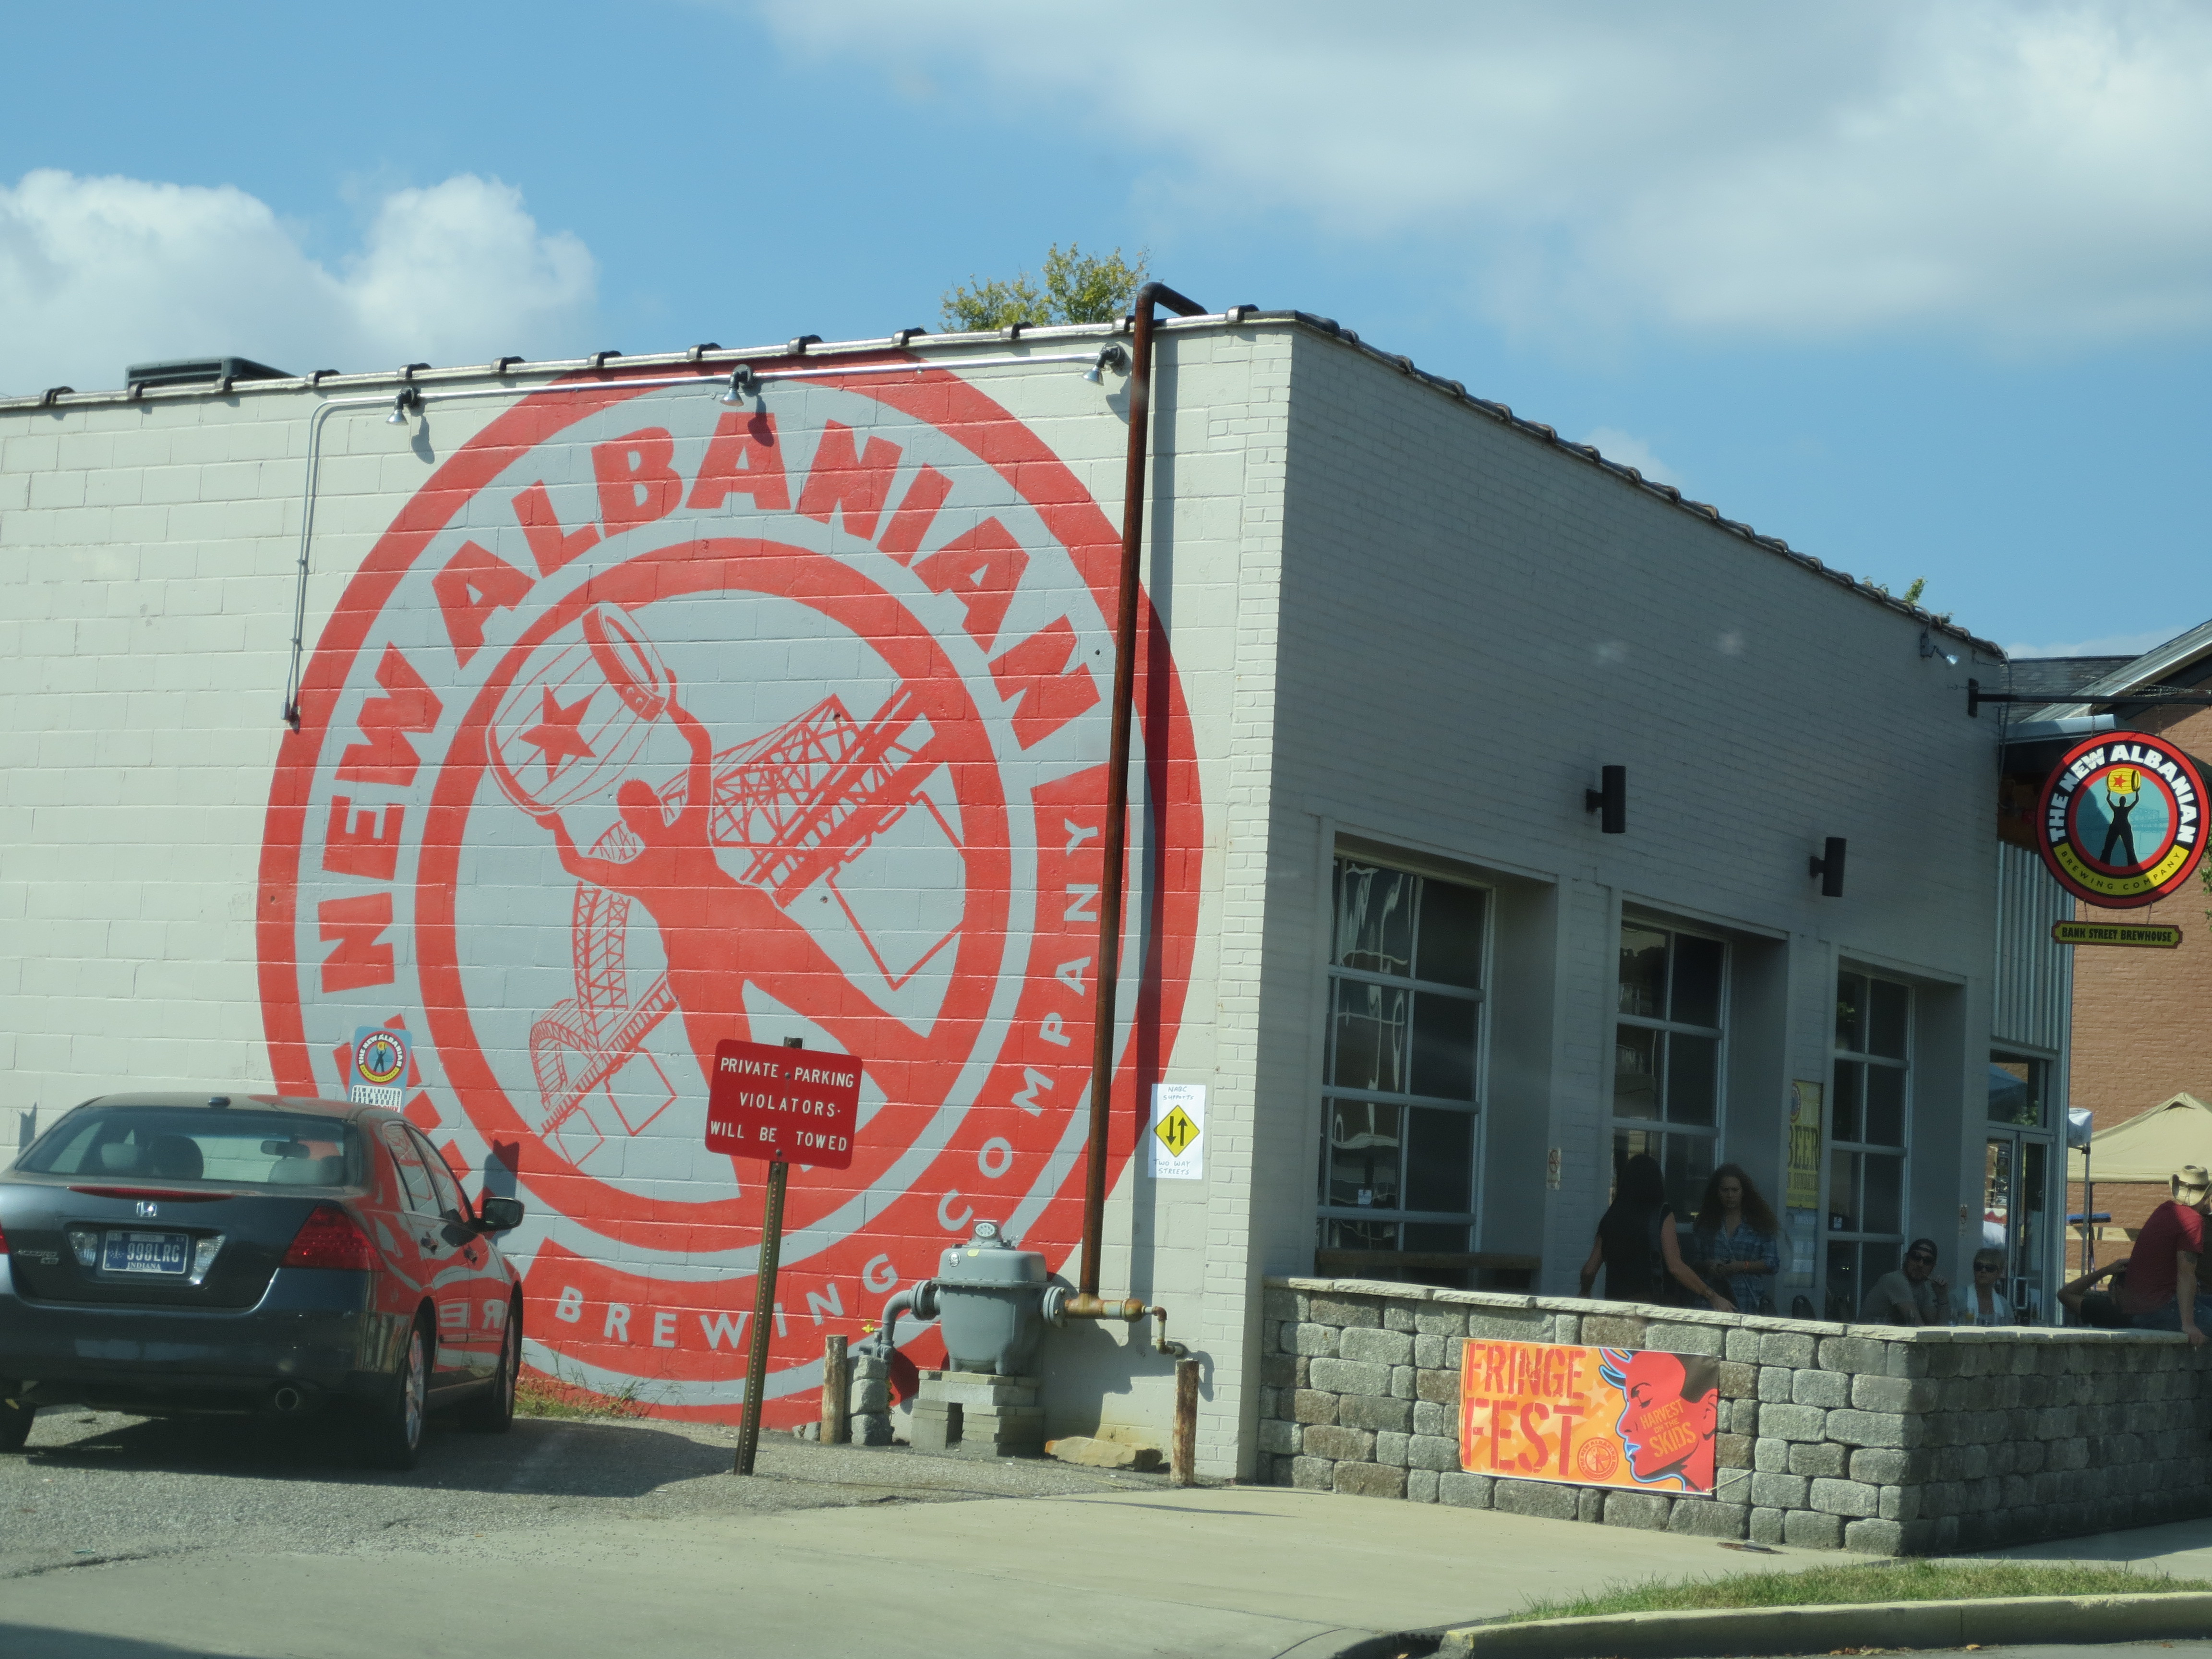 New Albanian Brewing Company - Albany, IN